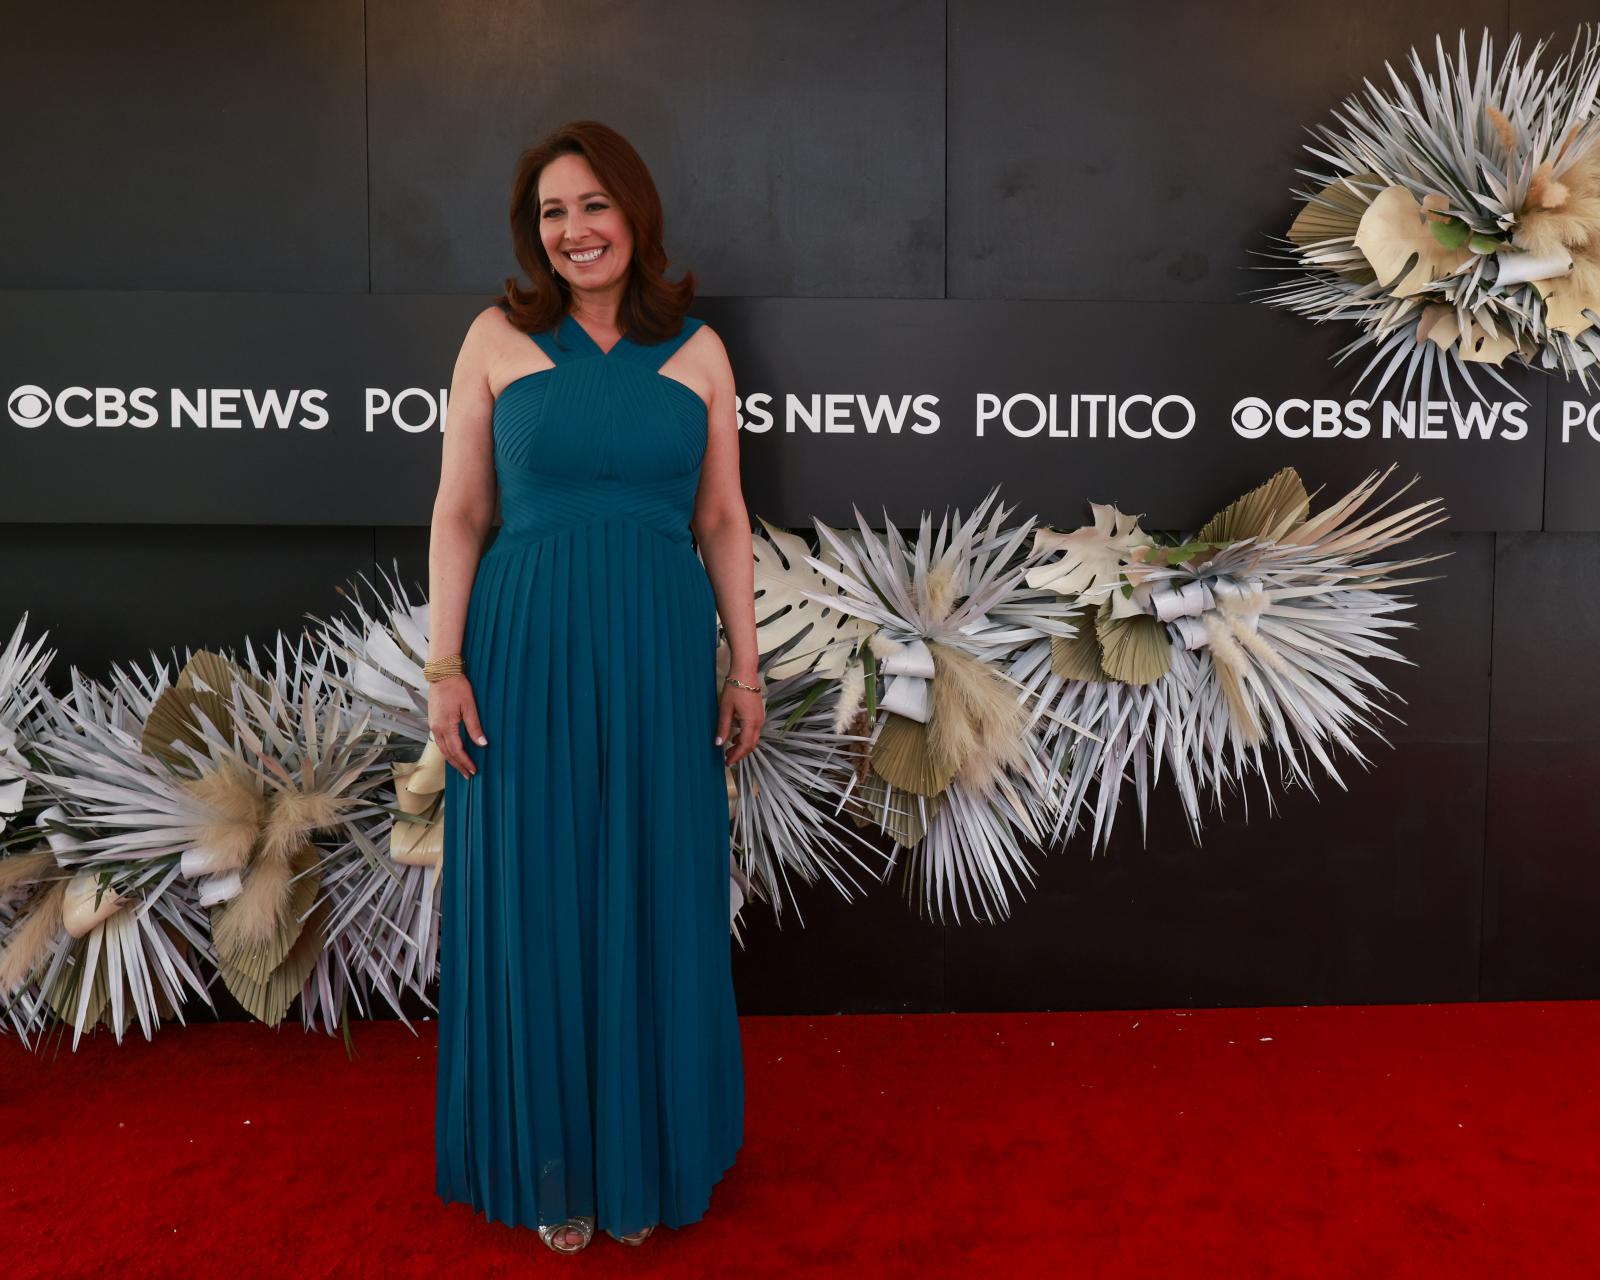 Nancy Cordes at the CBS News/POLITICO reception ahead of the White House Correspondents' Association dinner at the Washington Hilton, in Washington, D.C., on April 30, 2022. Photo credit: Eman Mohammed/CBS ©2022 CBS Broadcasting, Inc. All Rights Reserved. Washington United States